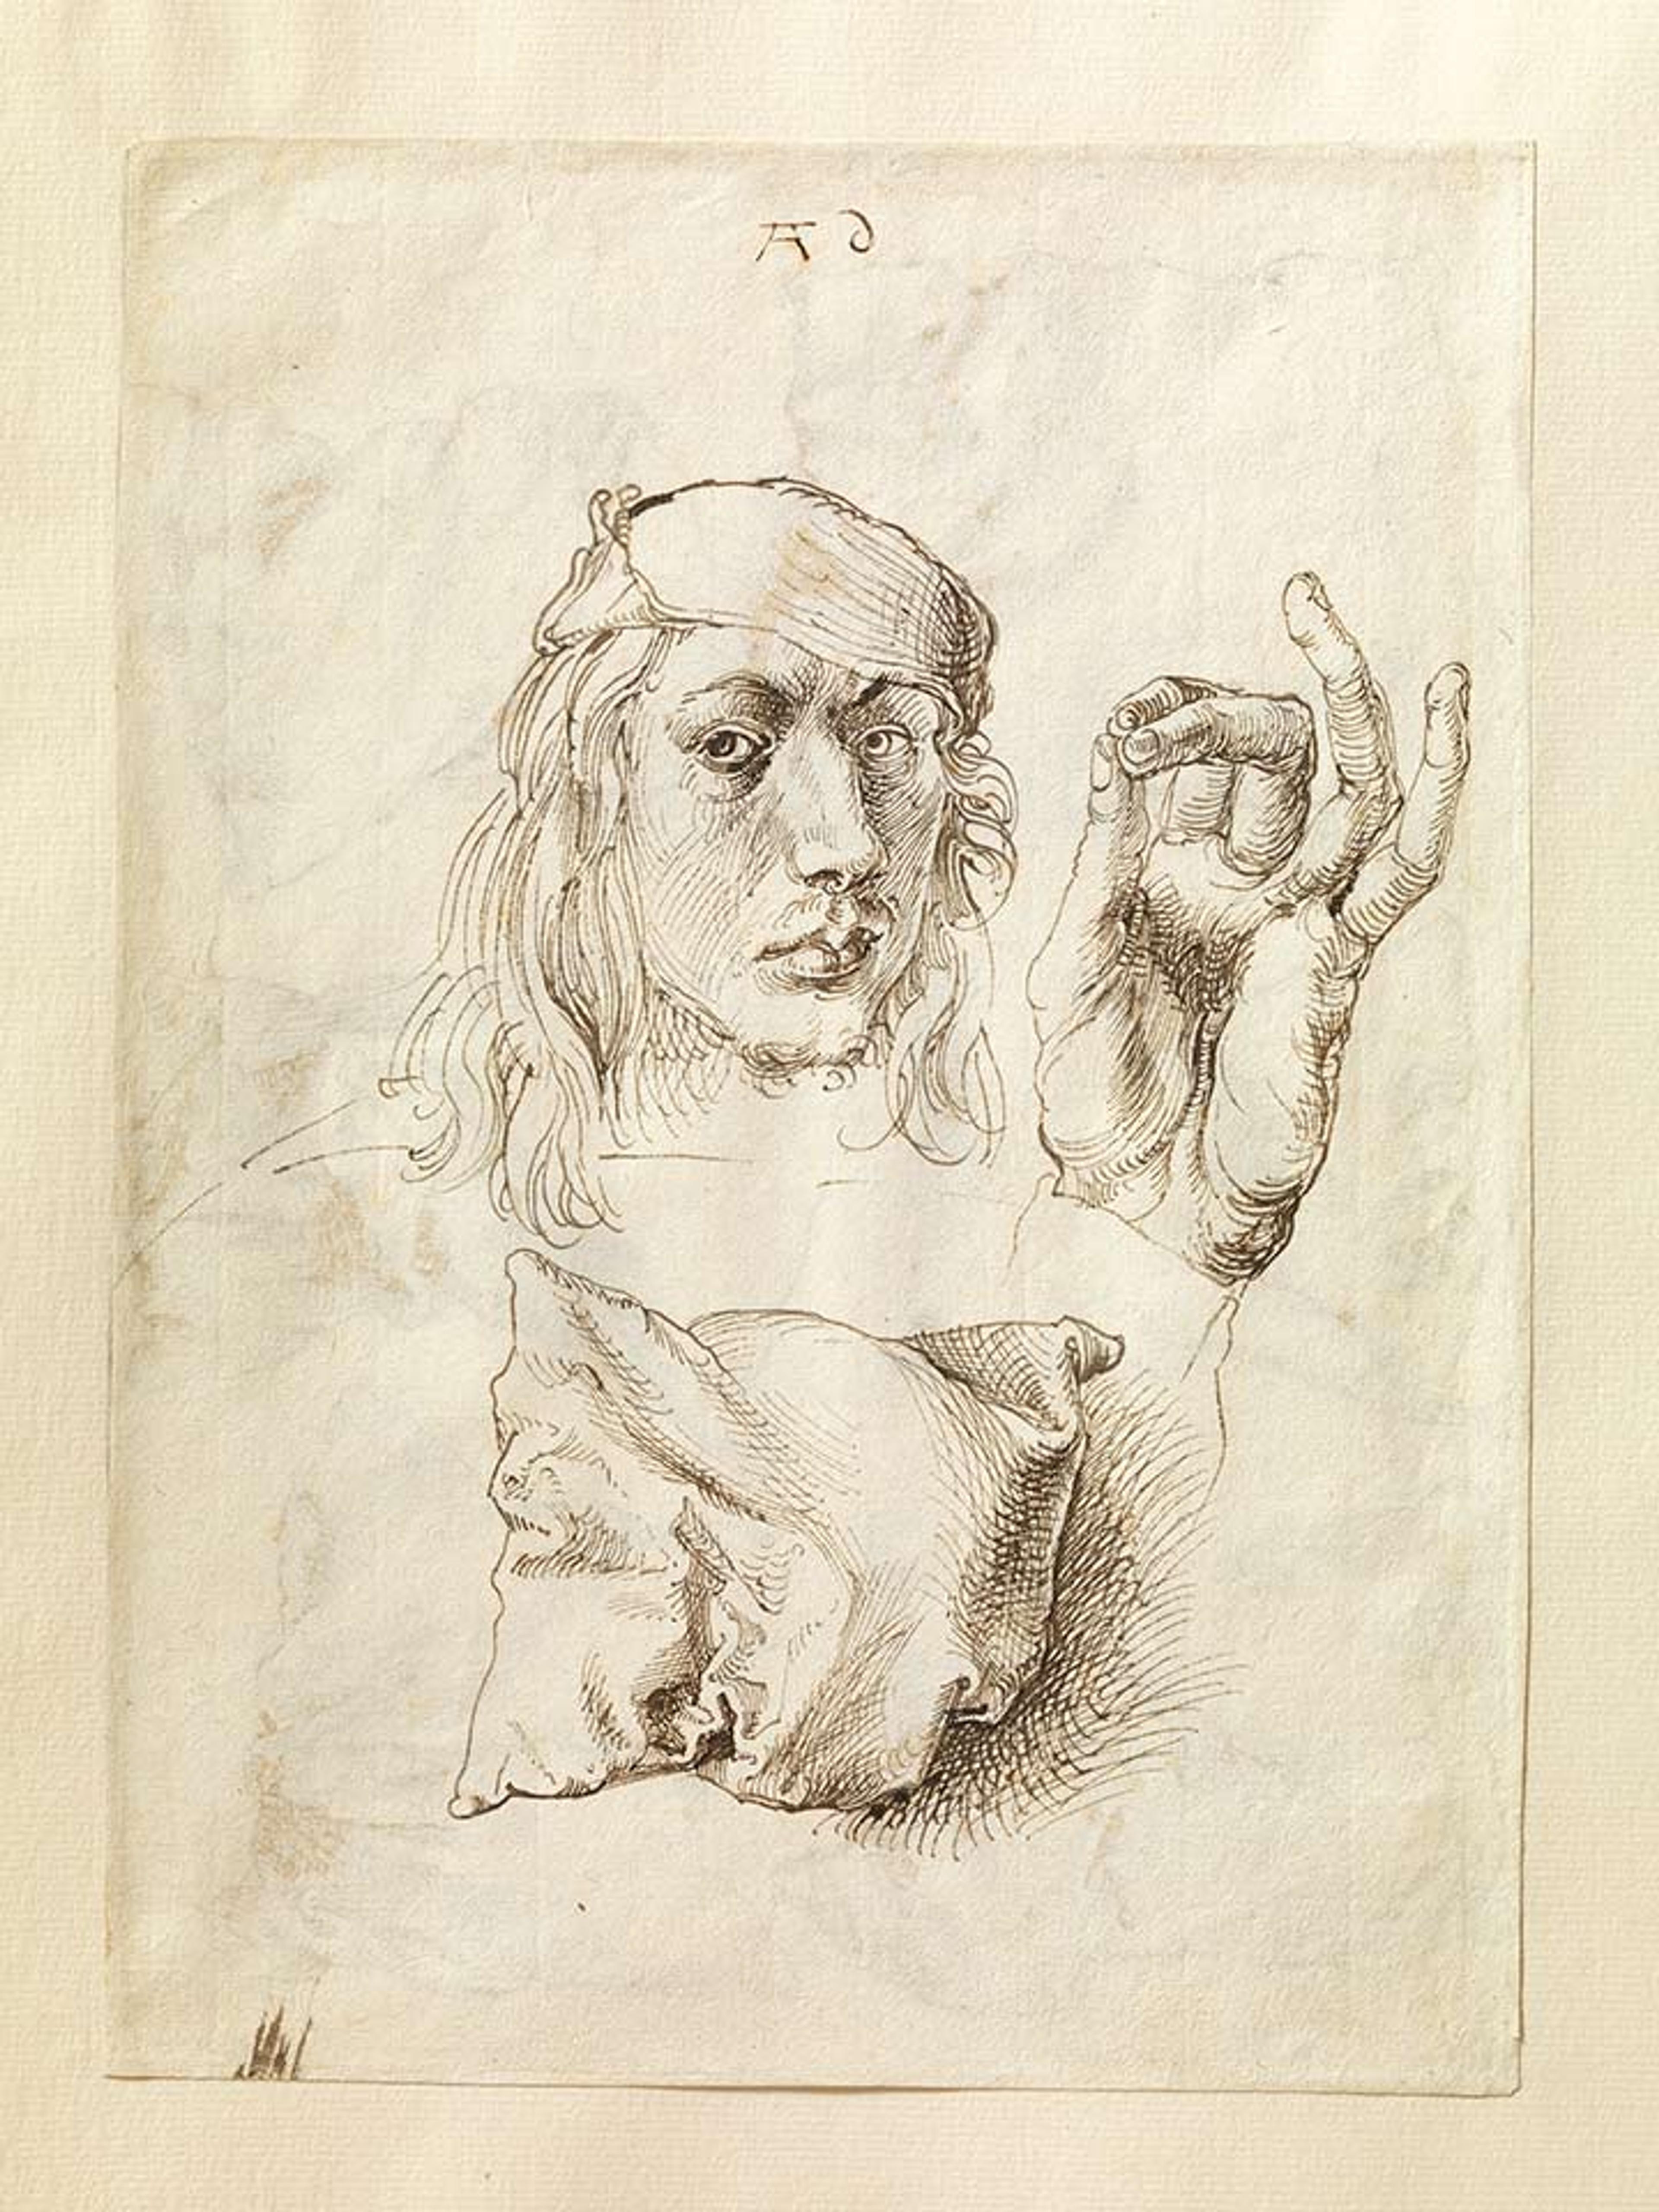 Self-portrait and study of a hand and a pillow by Albrecht Durer